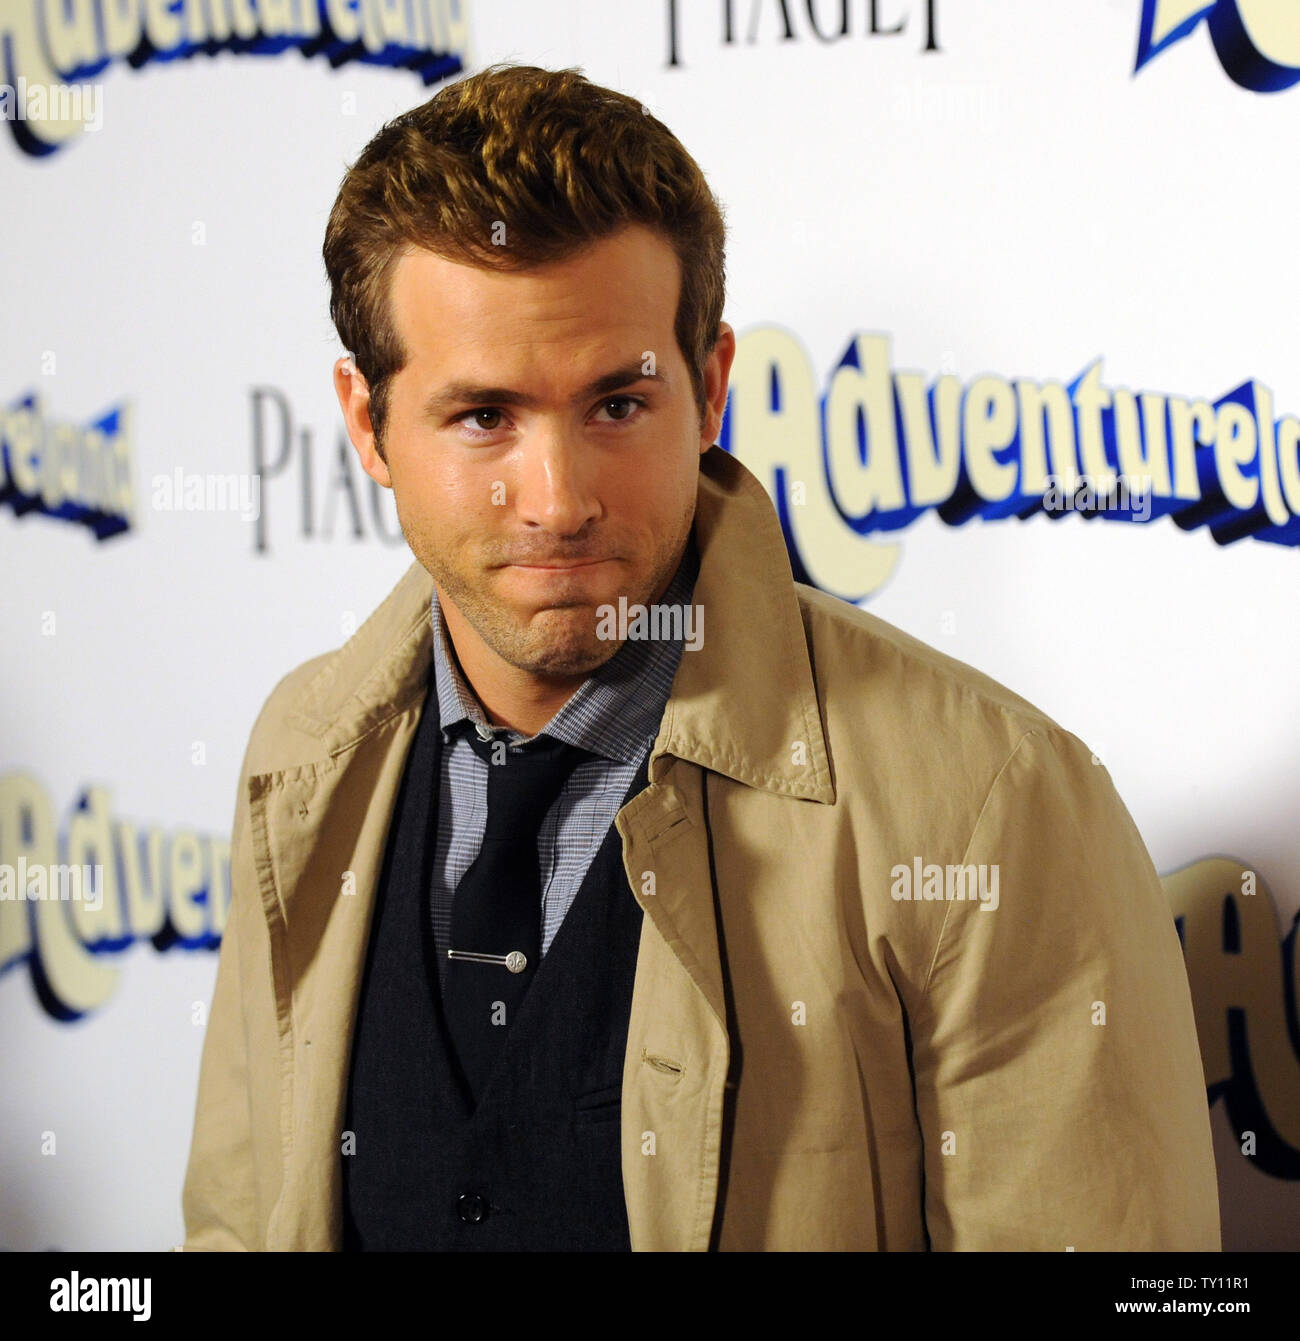 Cast member Ryan Reynolds attends the premiere of the motion picture comedy 'Adventureland' in Los Angeles on March 16, 2009.  (UPI Photo/Jim Ruymen) Stock Photo